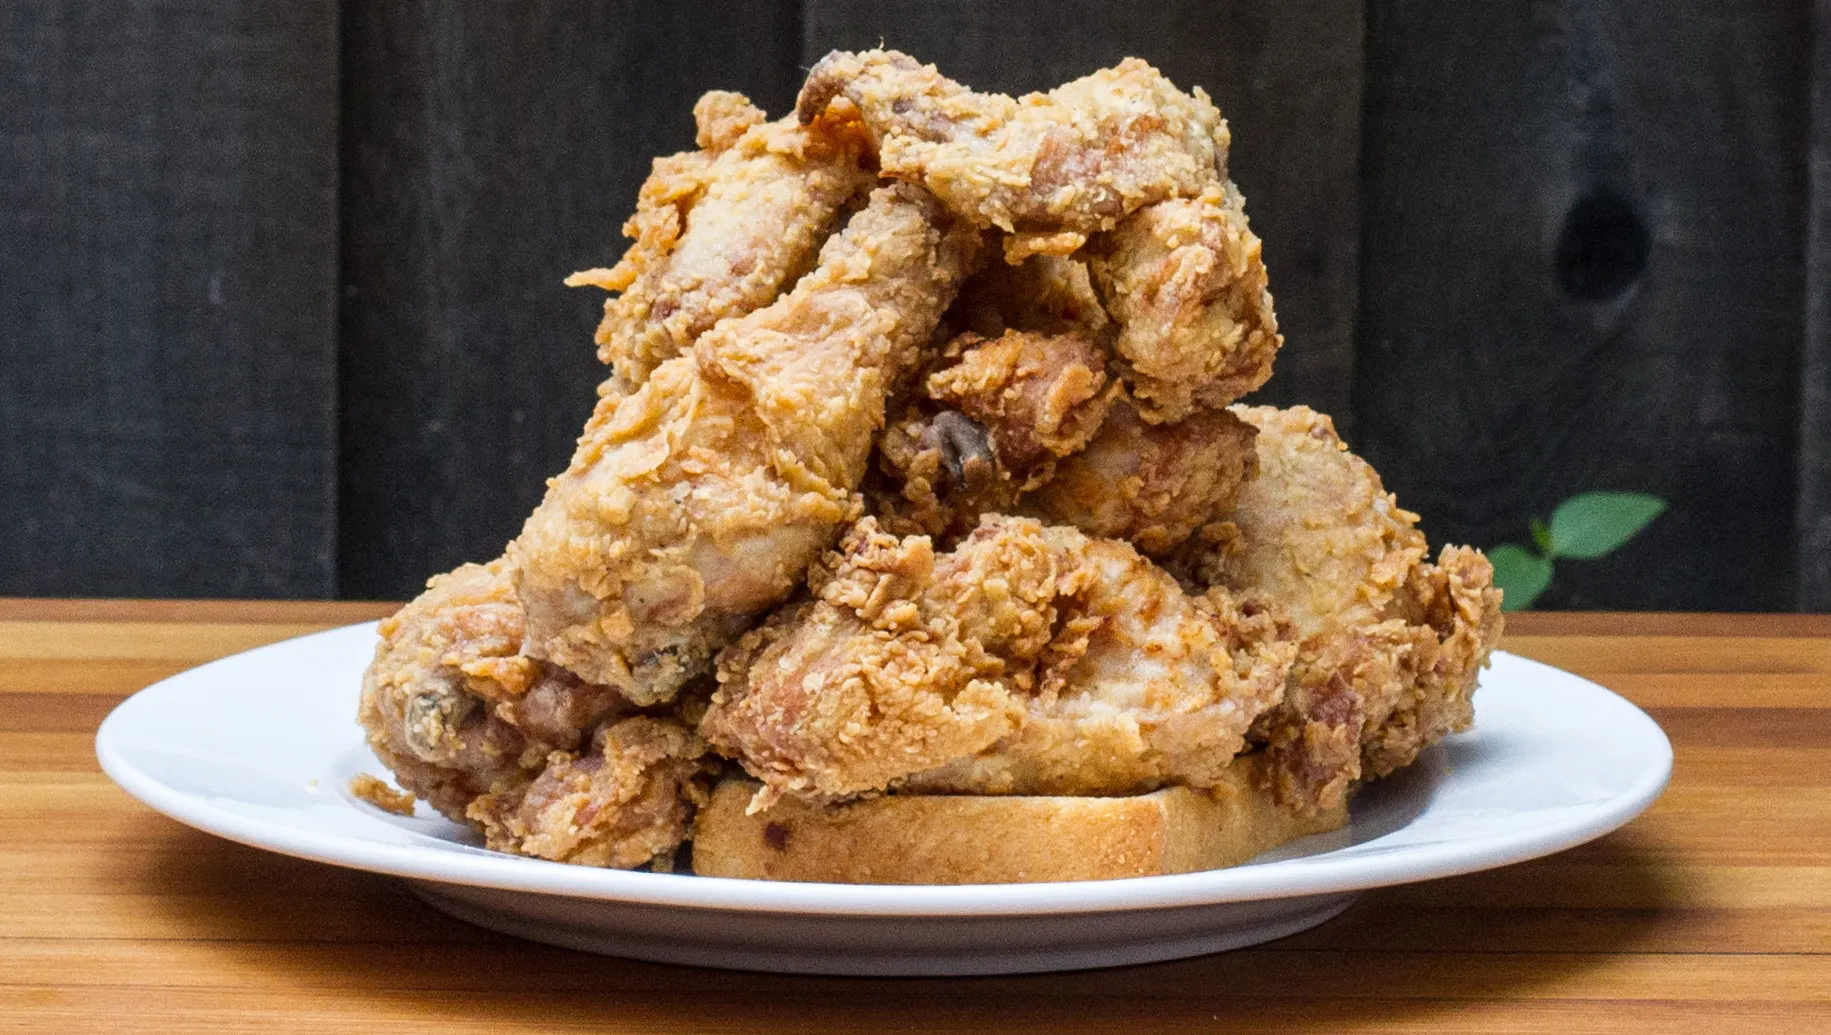 Southern fried chicken in America